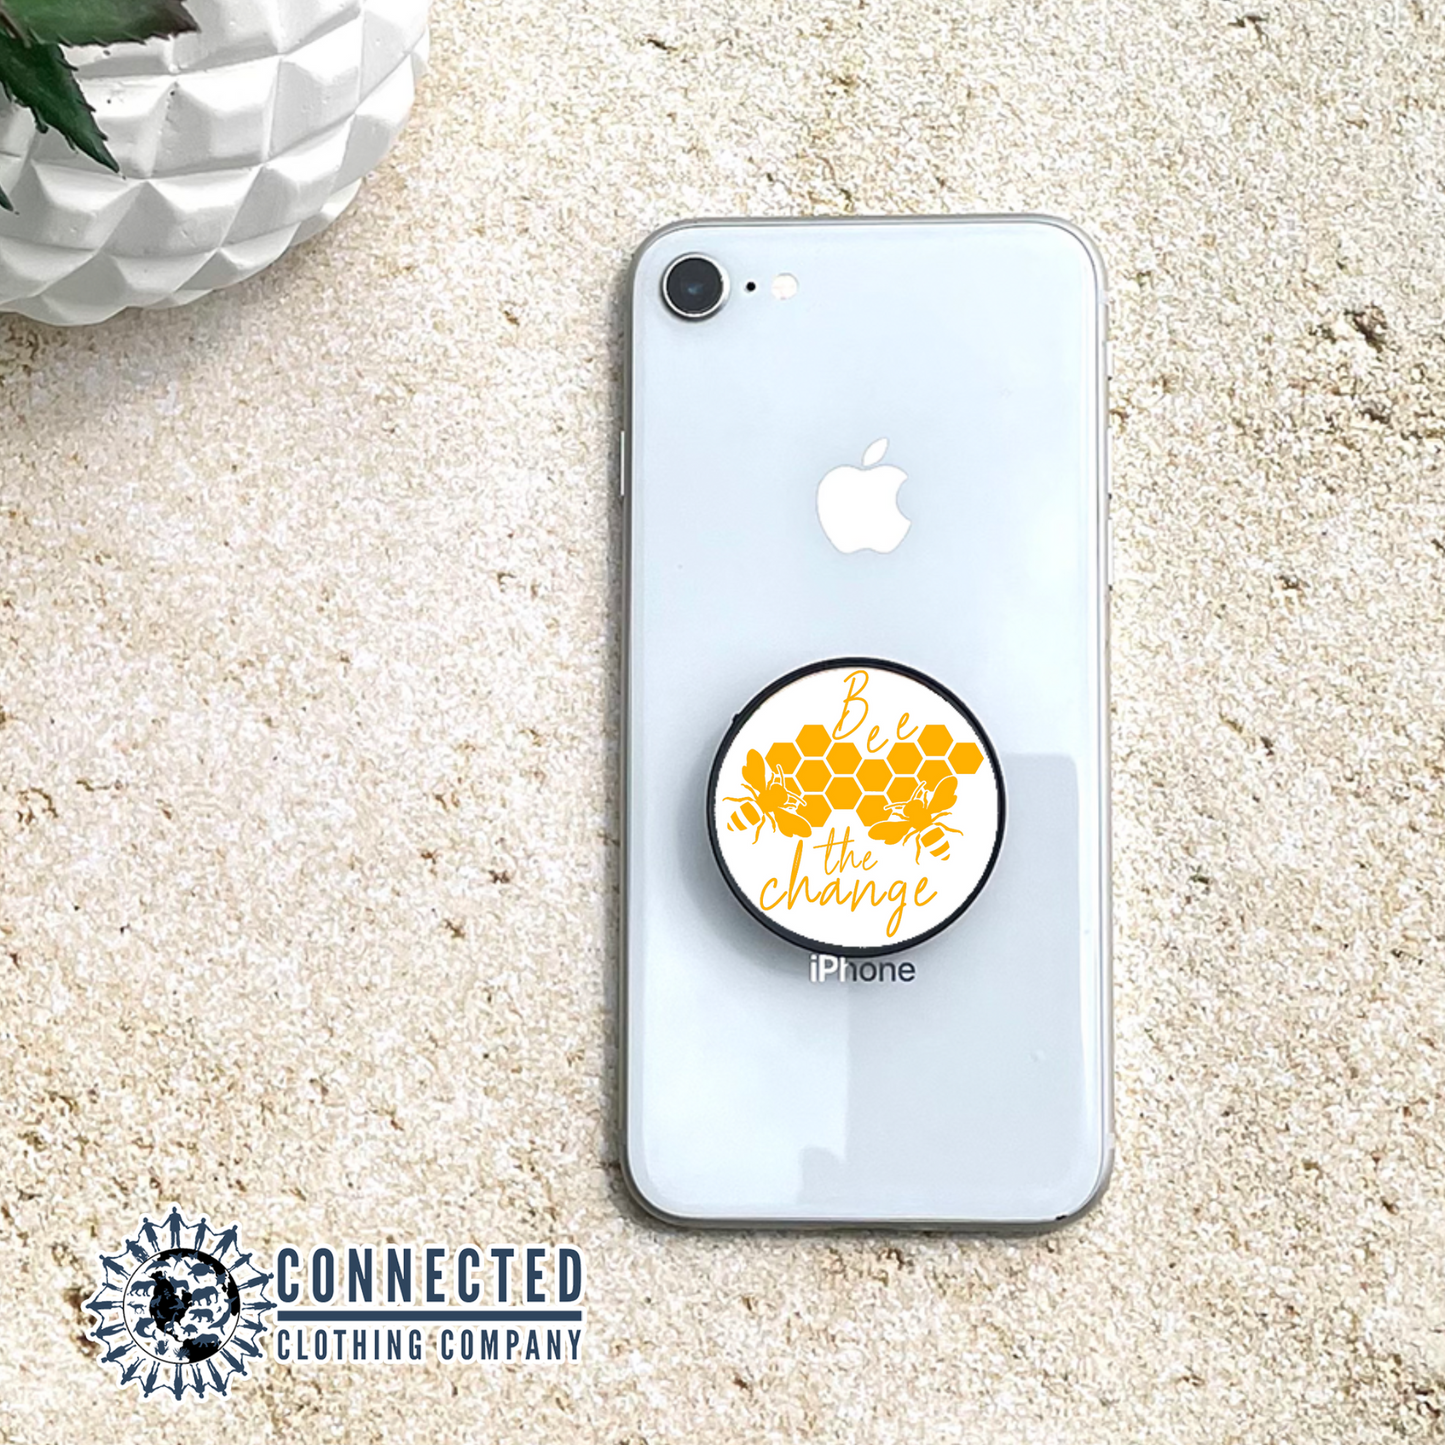 Bee The Change Phone Grip - nighttidemetalworks - 10% of proceeds donated to save the bees